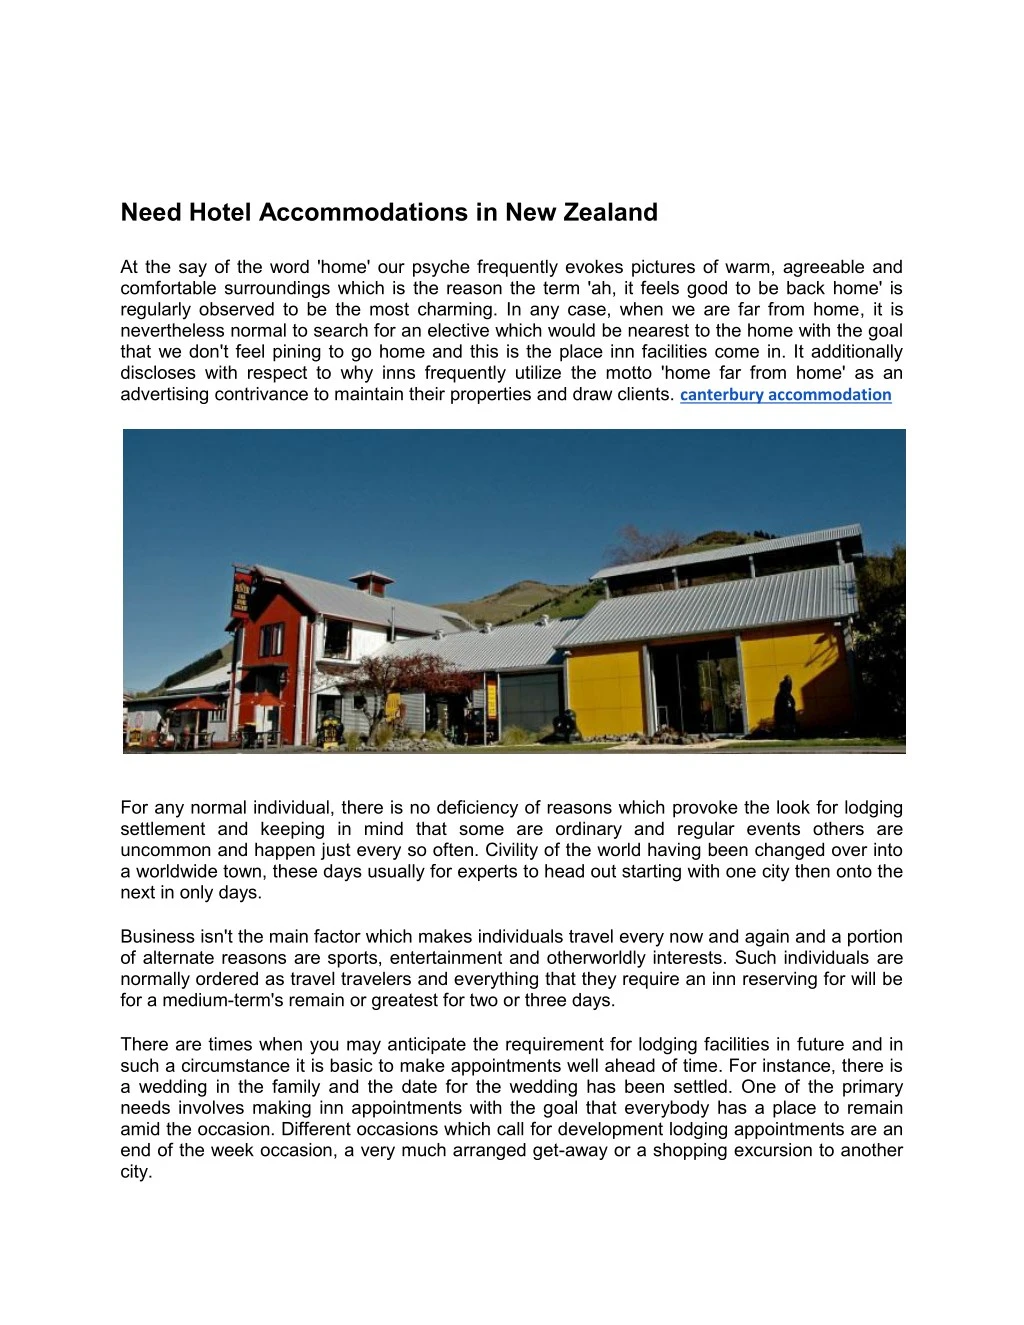 need hotel accommodations in new zealand